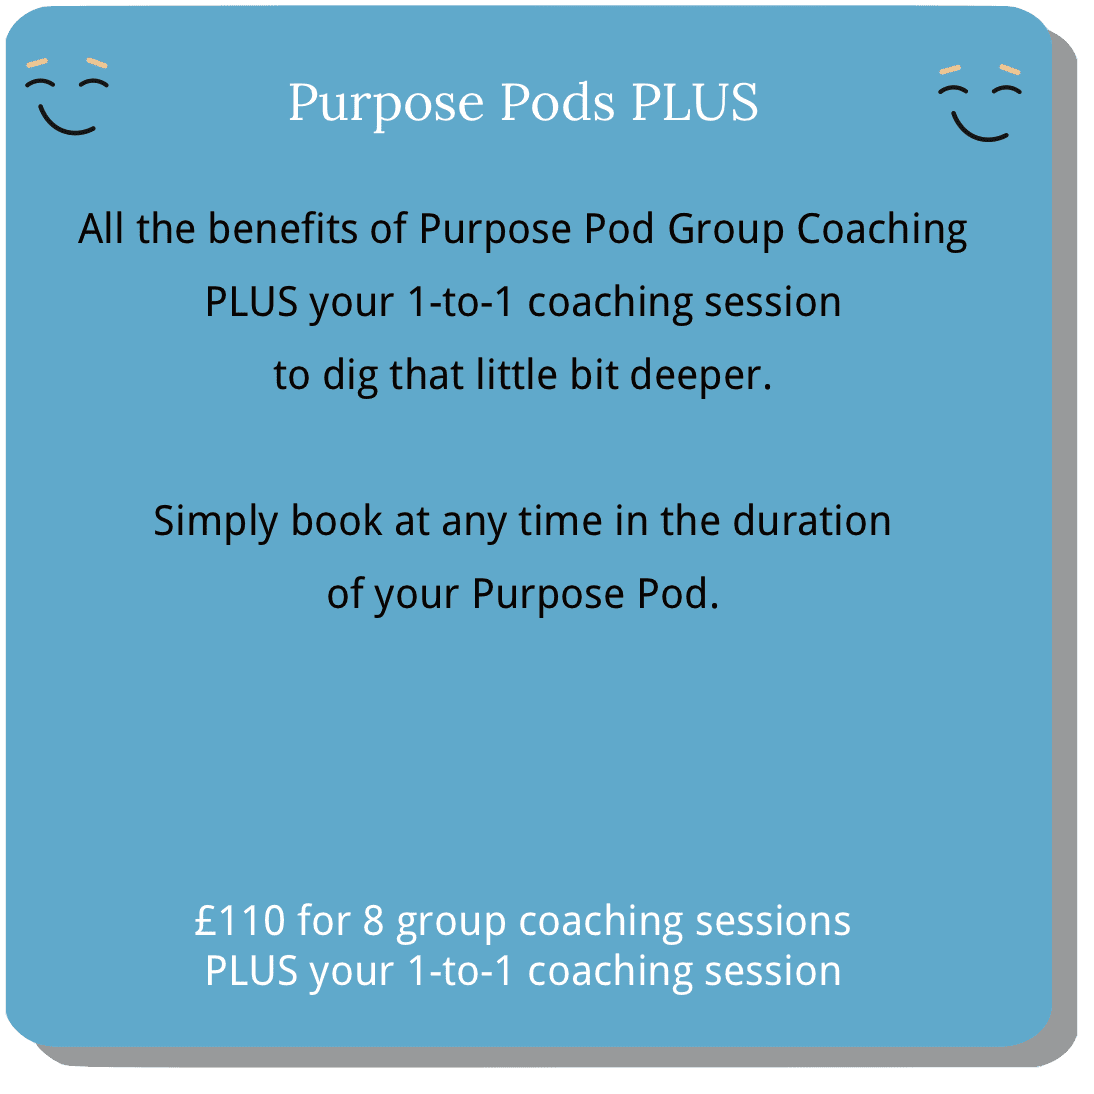 Purpose Pods Plus. Online and interactive Group Coaching for adults, includes a 1-to-1 coaching session.